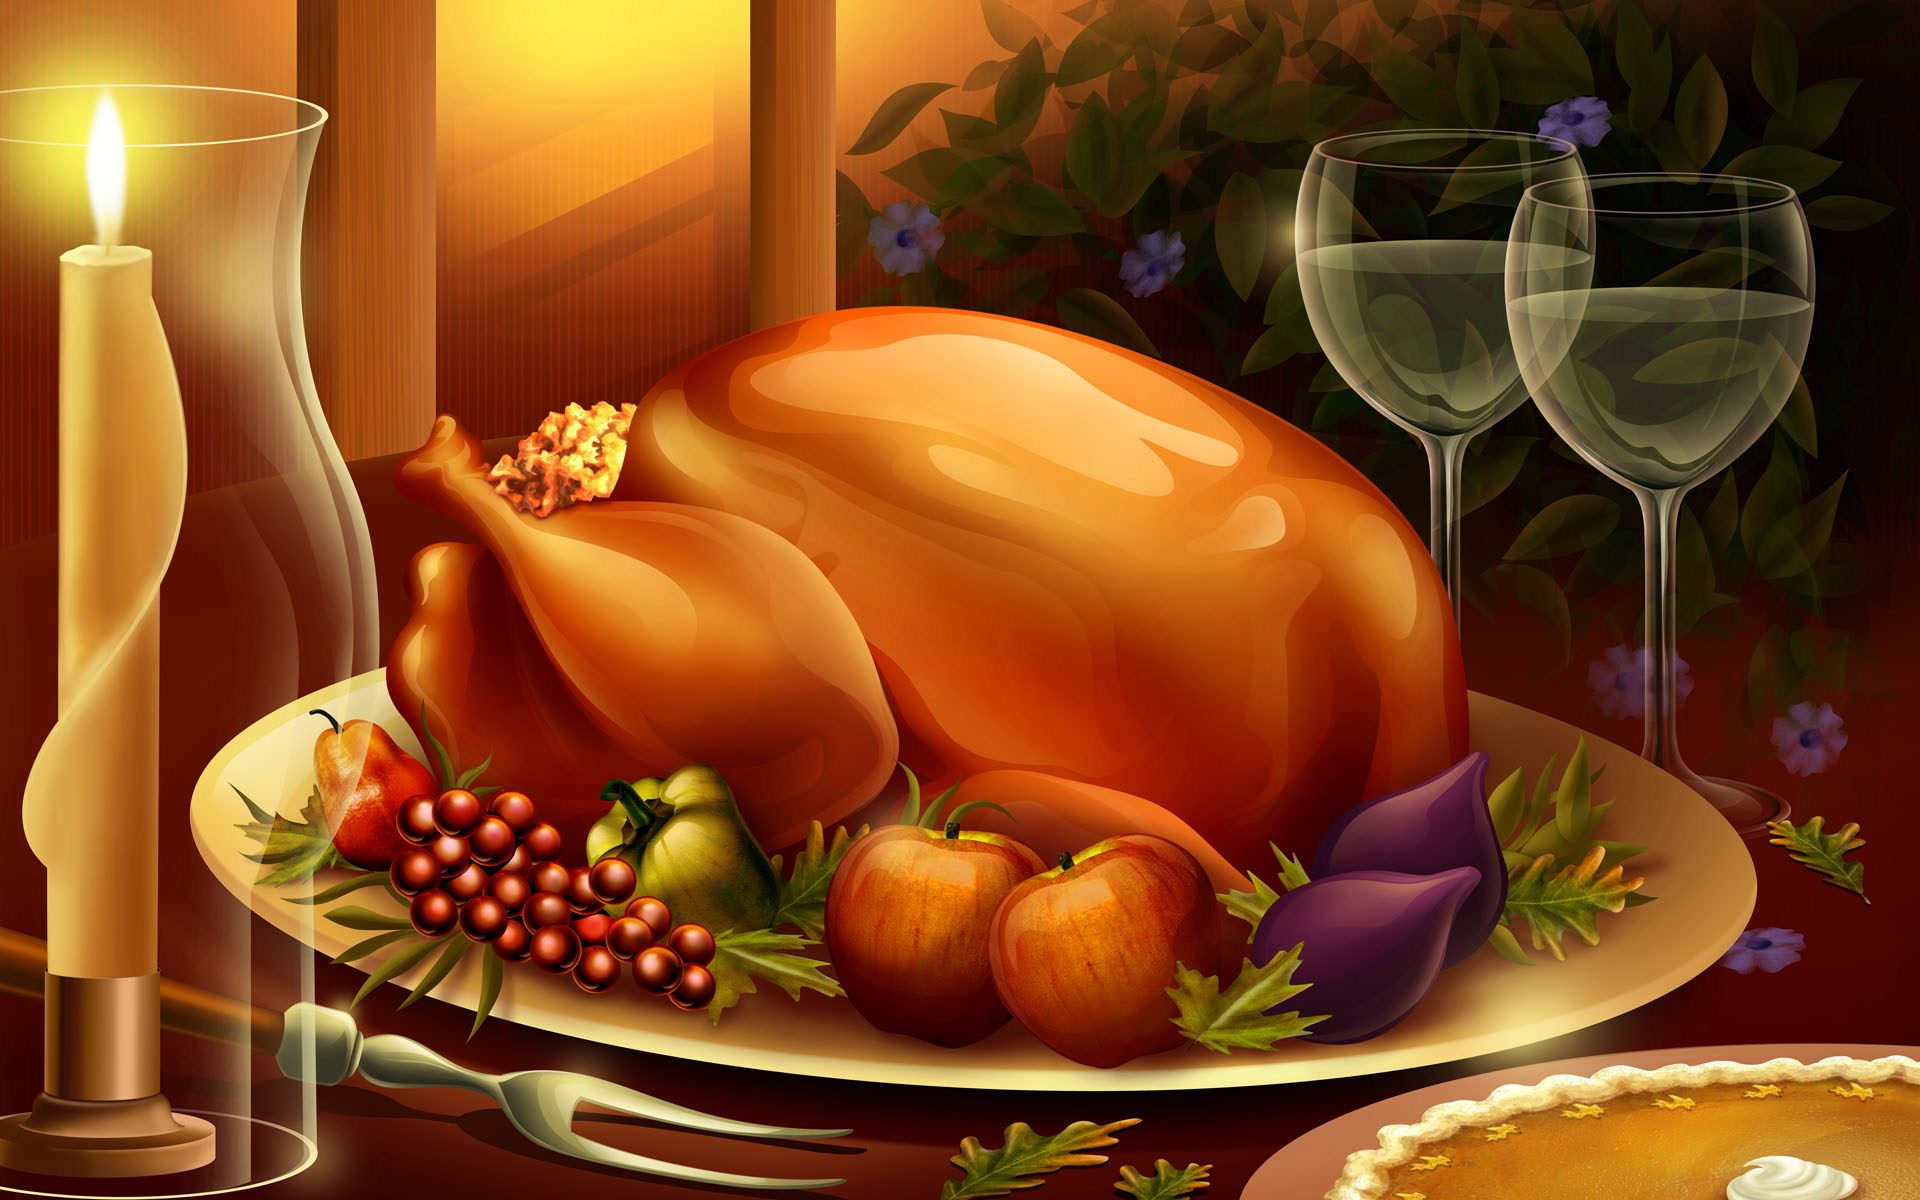 20 Best Happy Thanksgiving Day Wallpapers - High Quality - BlazoMania